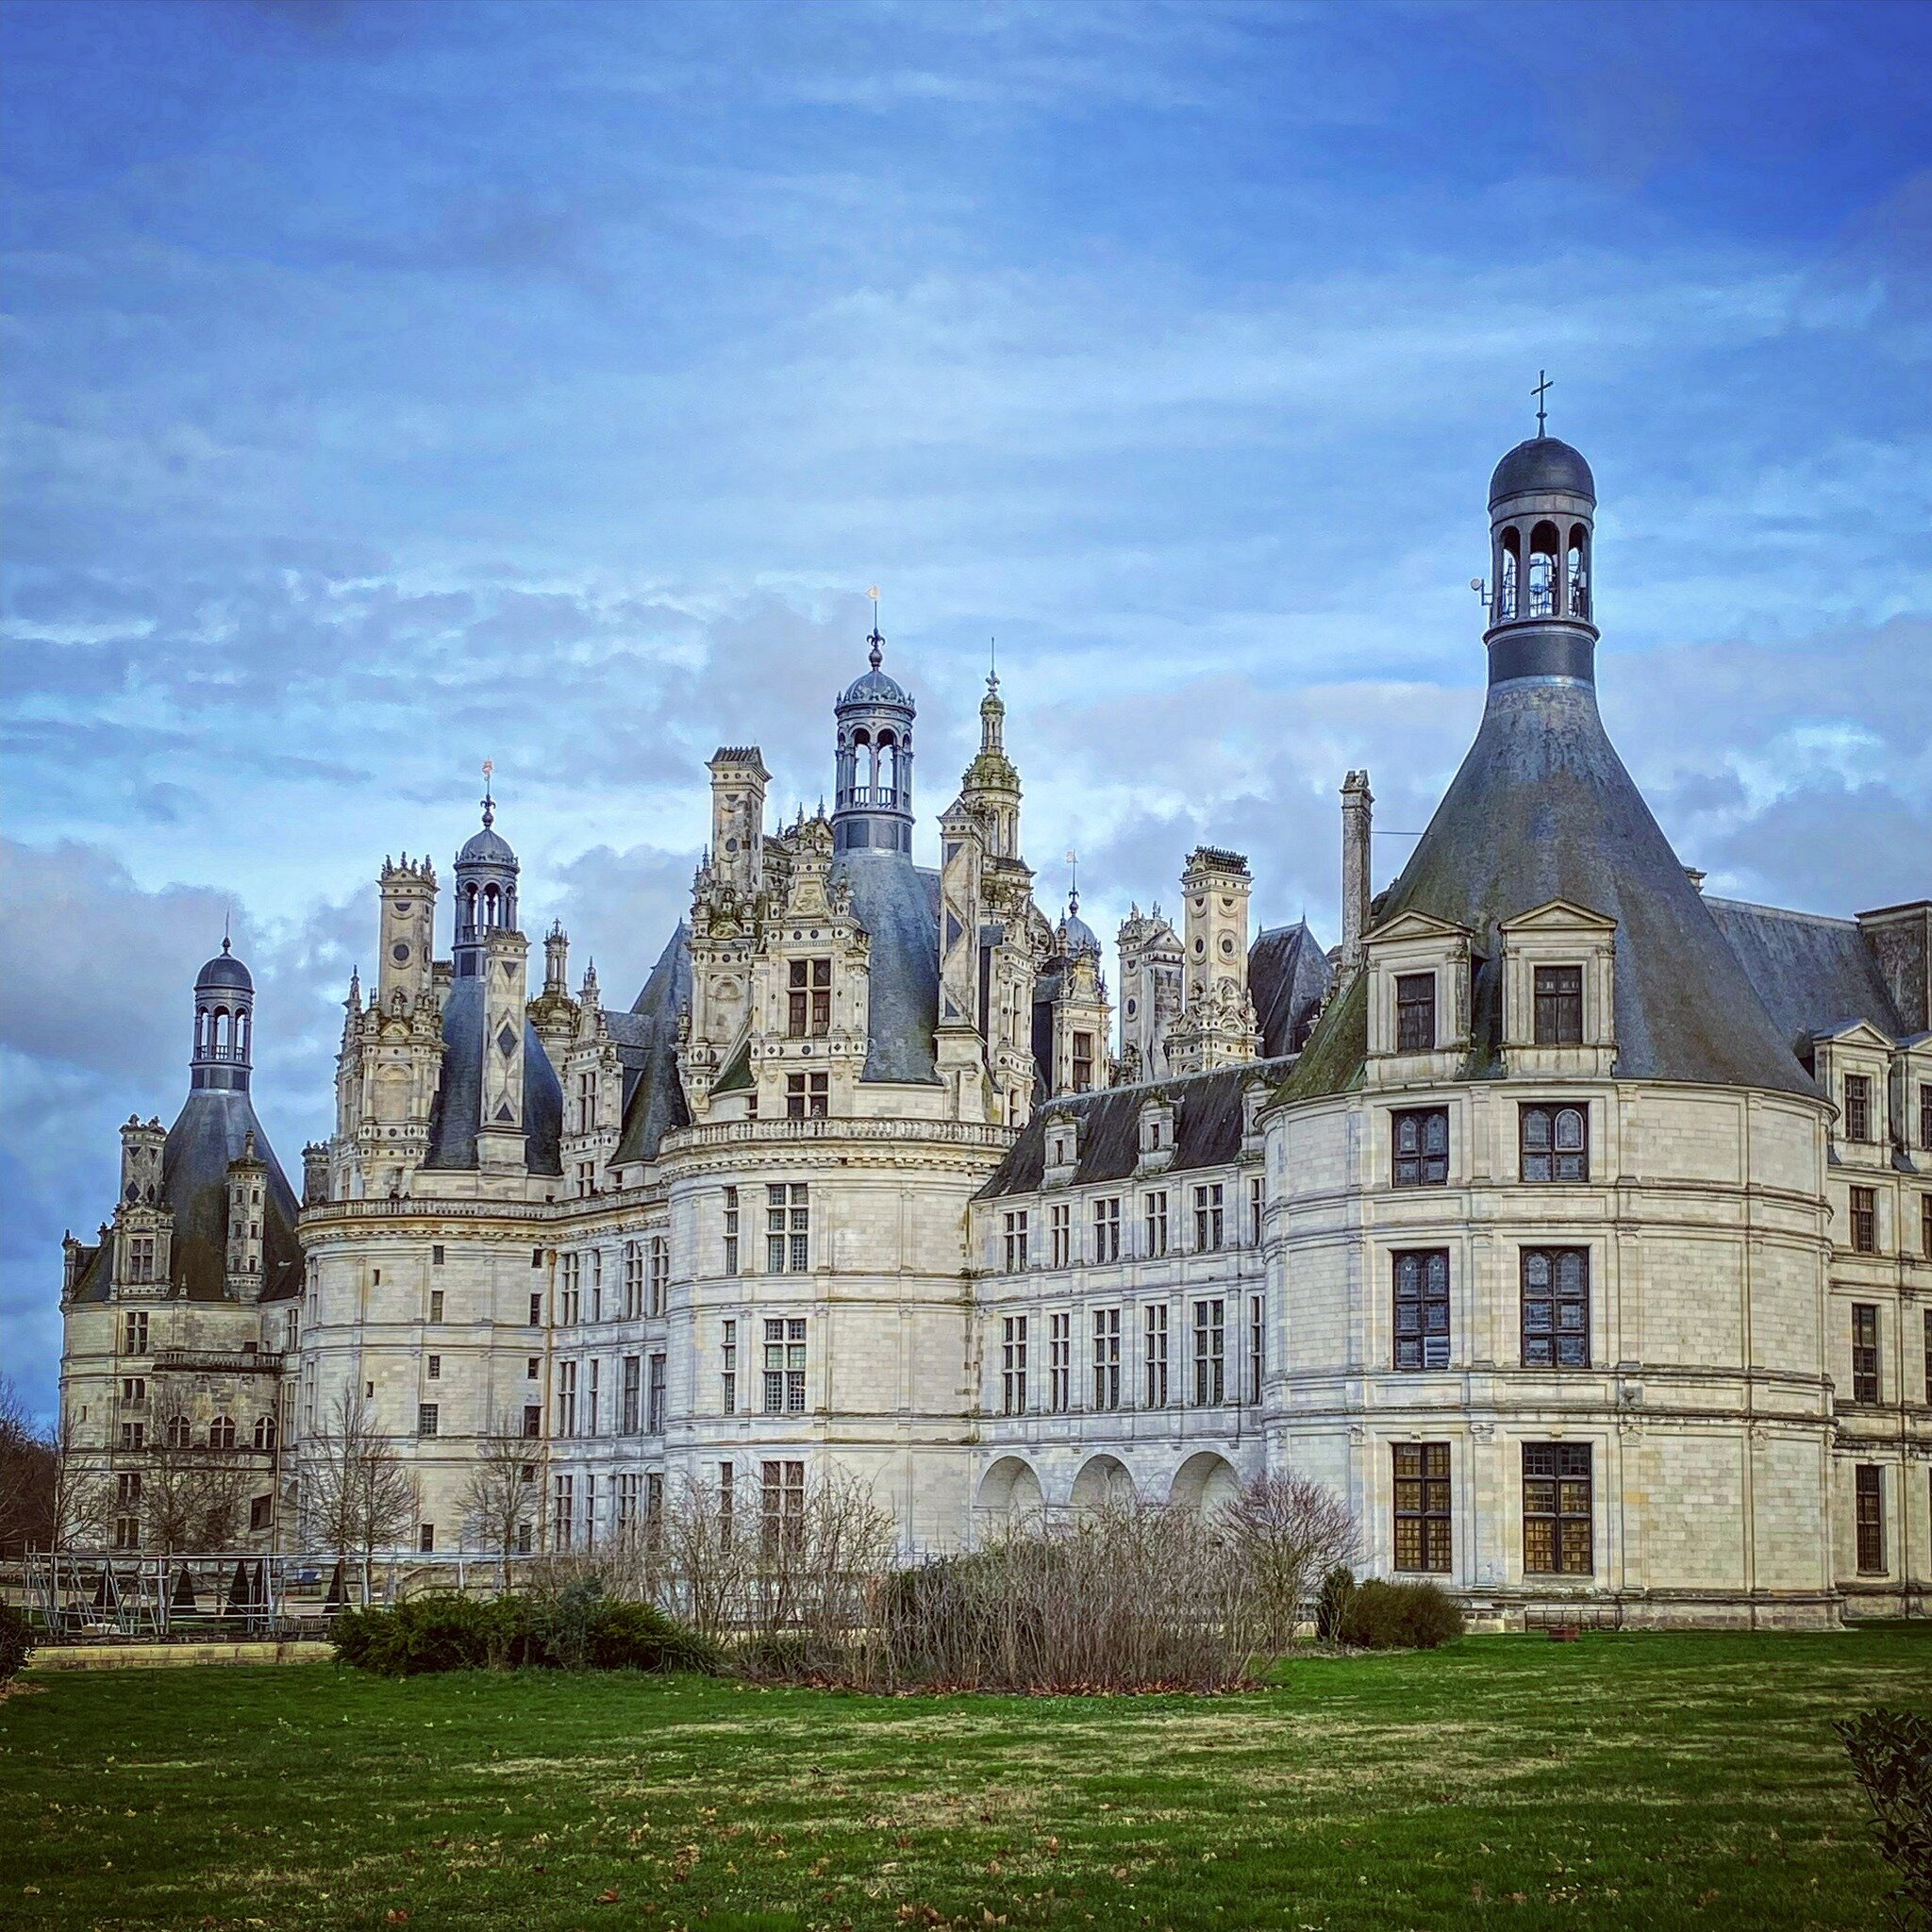 Queens, Kings  and Castles!
The French royalty may have fallen a long time ago, but these grand Chateau bring us back to this former time 👑💕🇫🇷